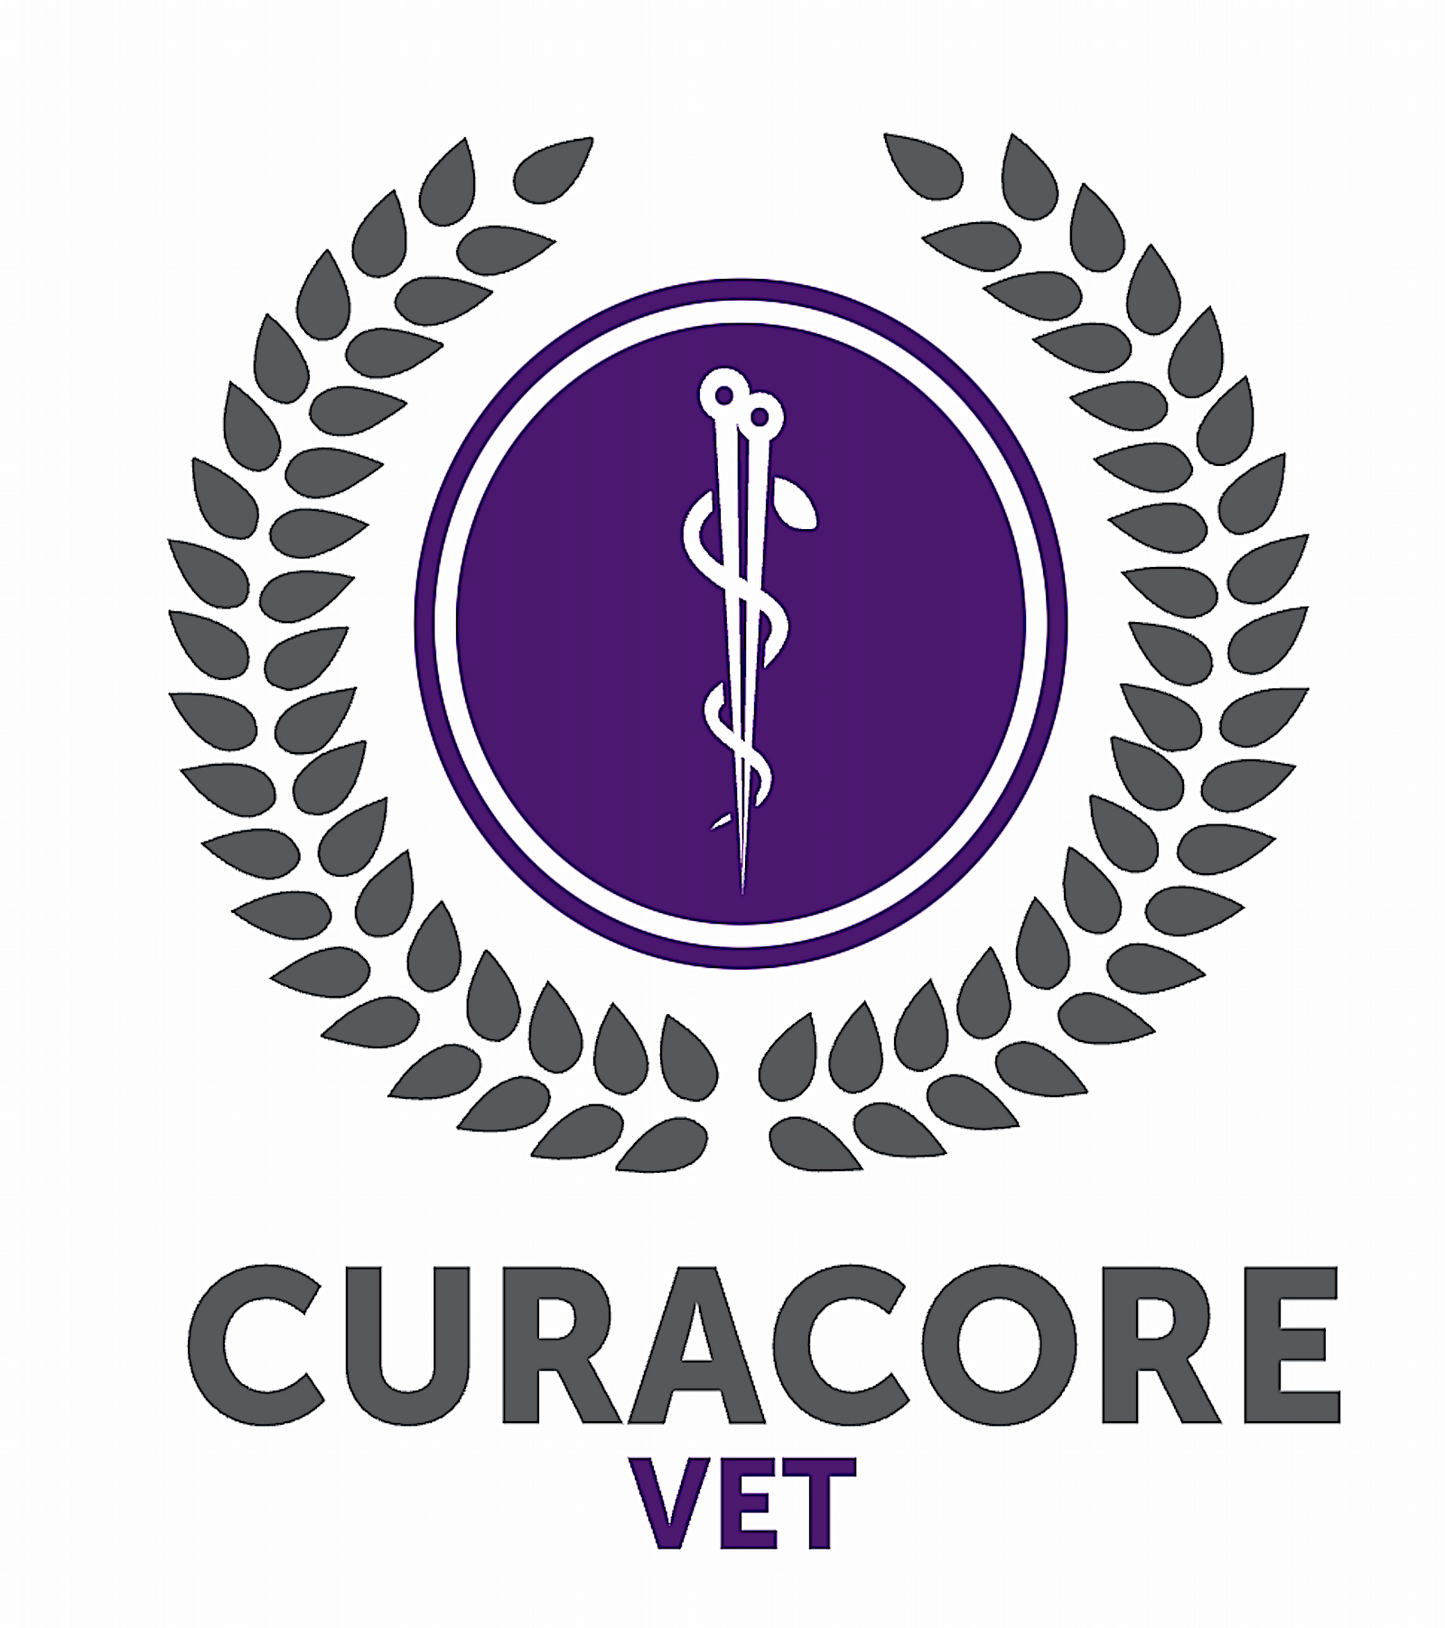 CURACORE VET: Science-based teaching since 1998